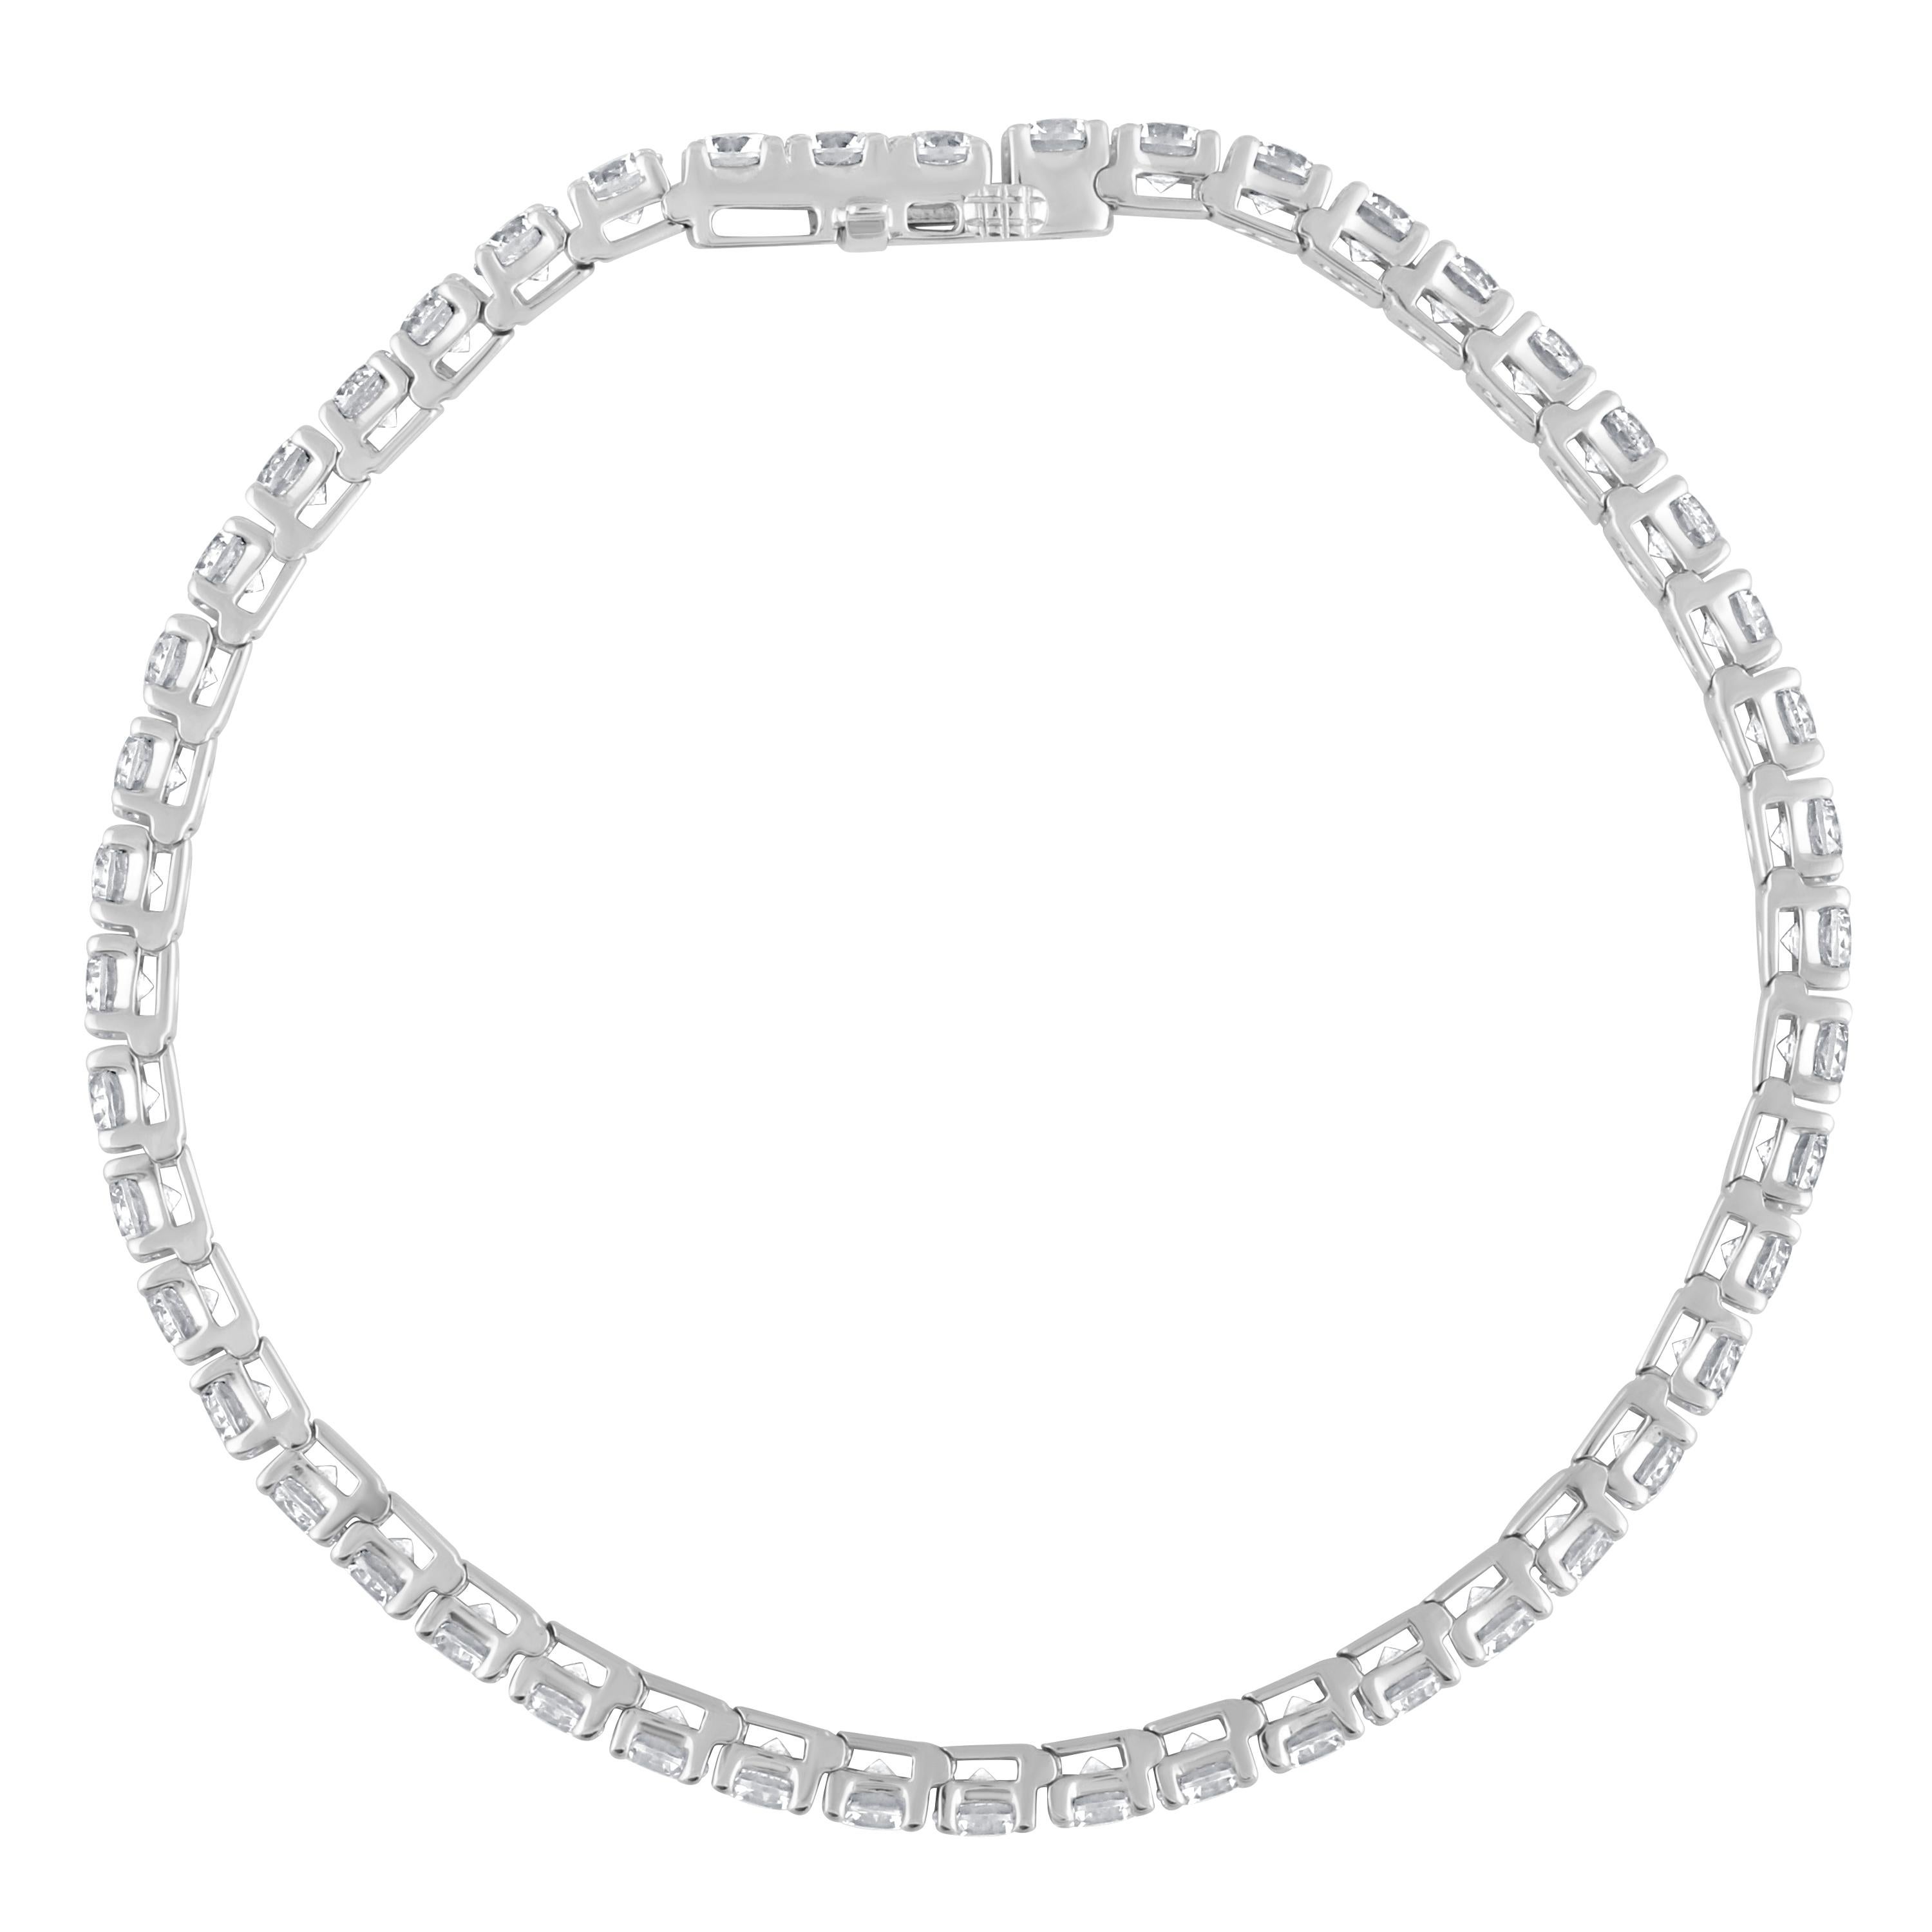 A perfect look just for her, this diamond tennis bracelet is certain to take her breath away. Fashioned in modern 14K white gold, this timeless design features an awe-inspiring 12 ctw. of prong-set round diamonds, each with a color ranking of I-J